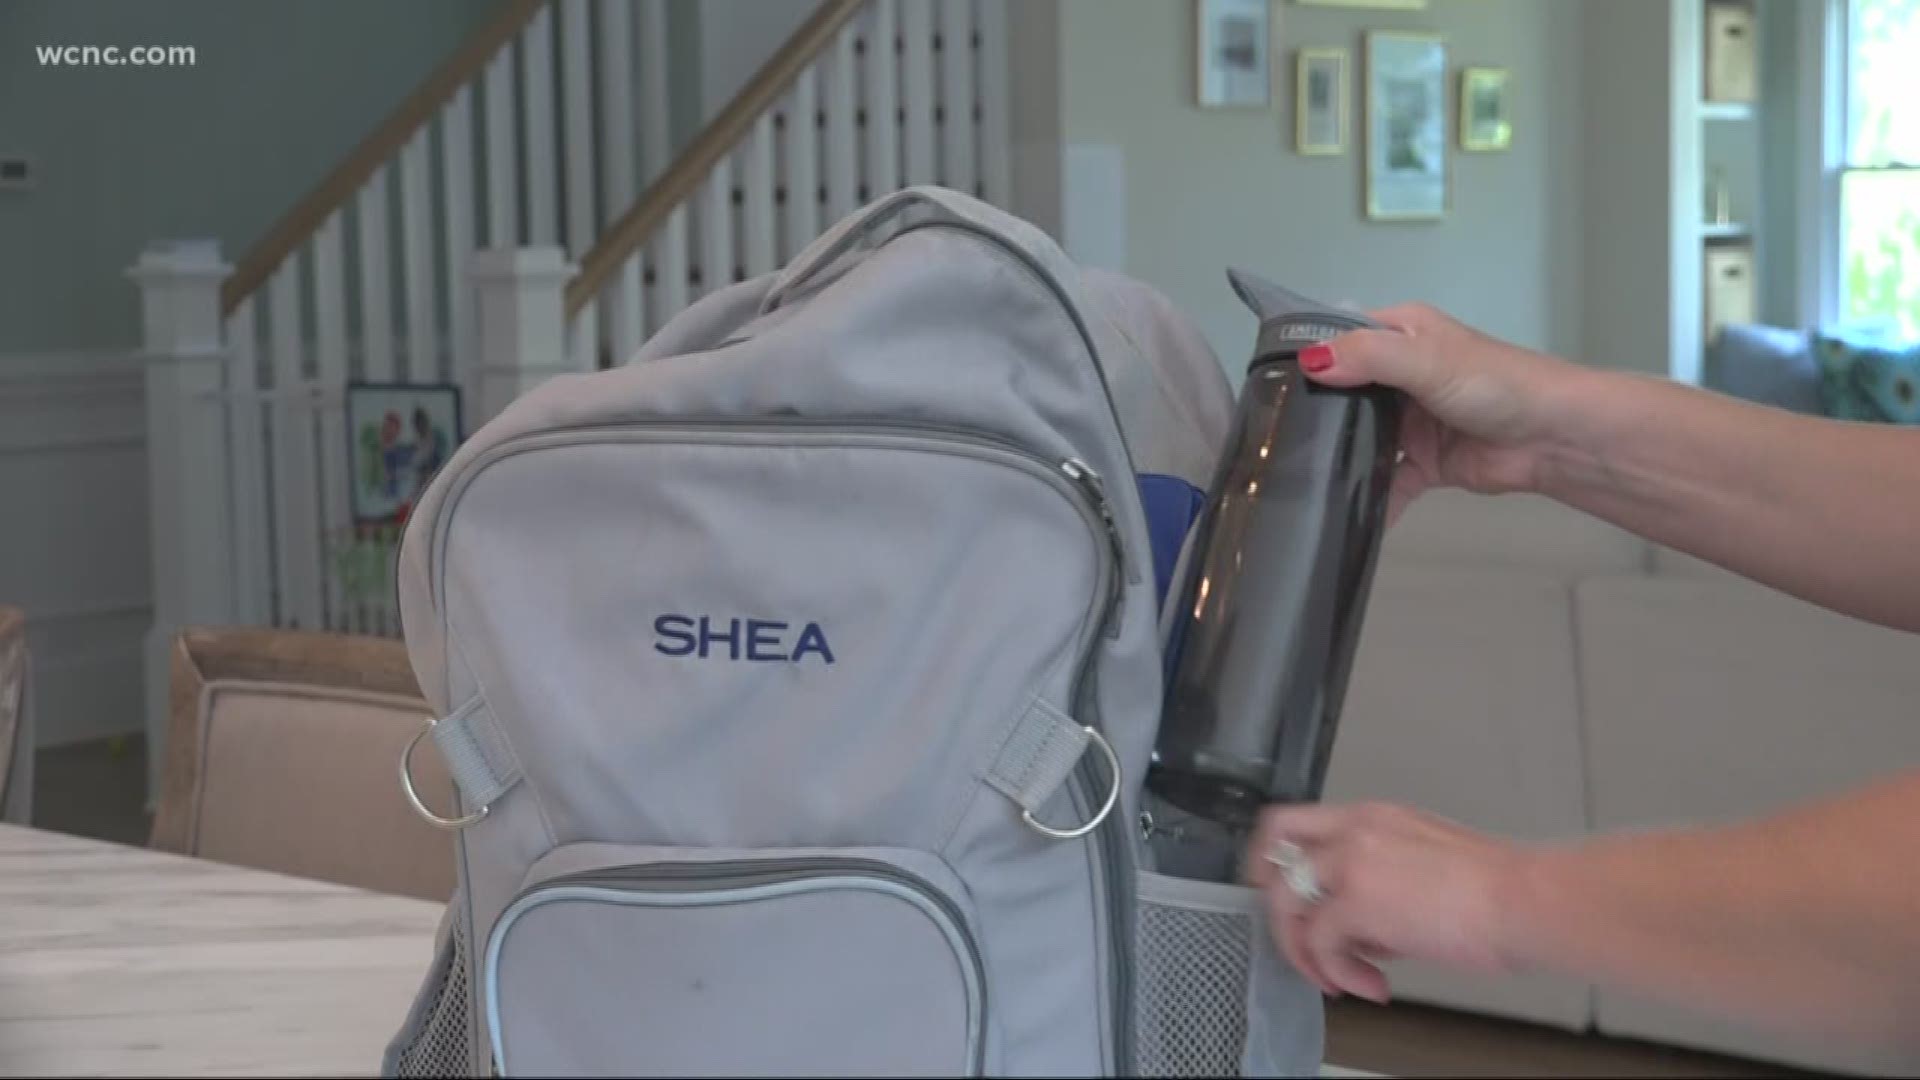 A new study shows that heavy backpacks can cause life-long back problems for kids.